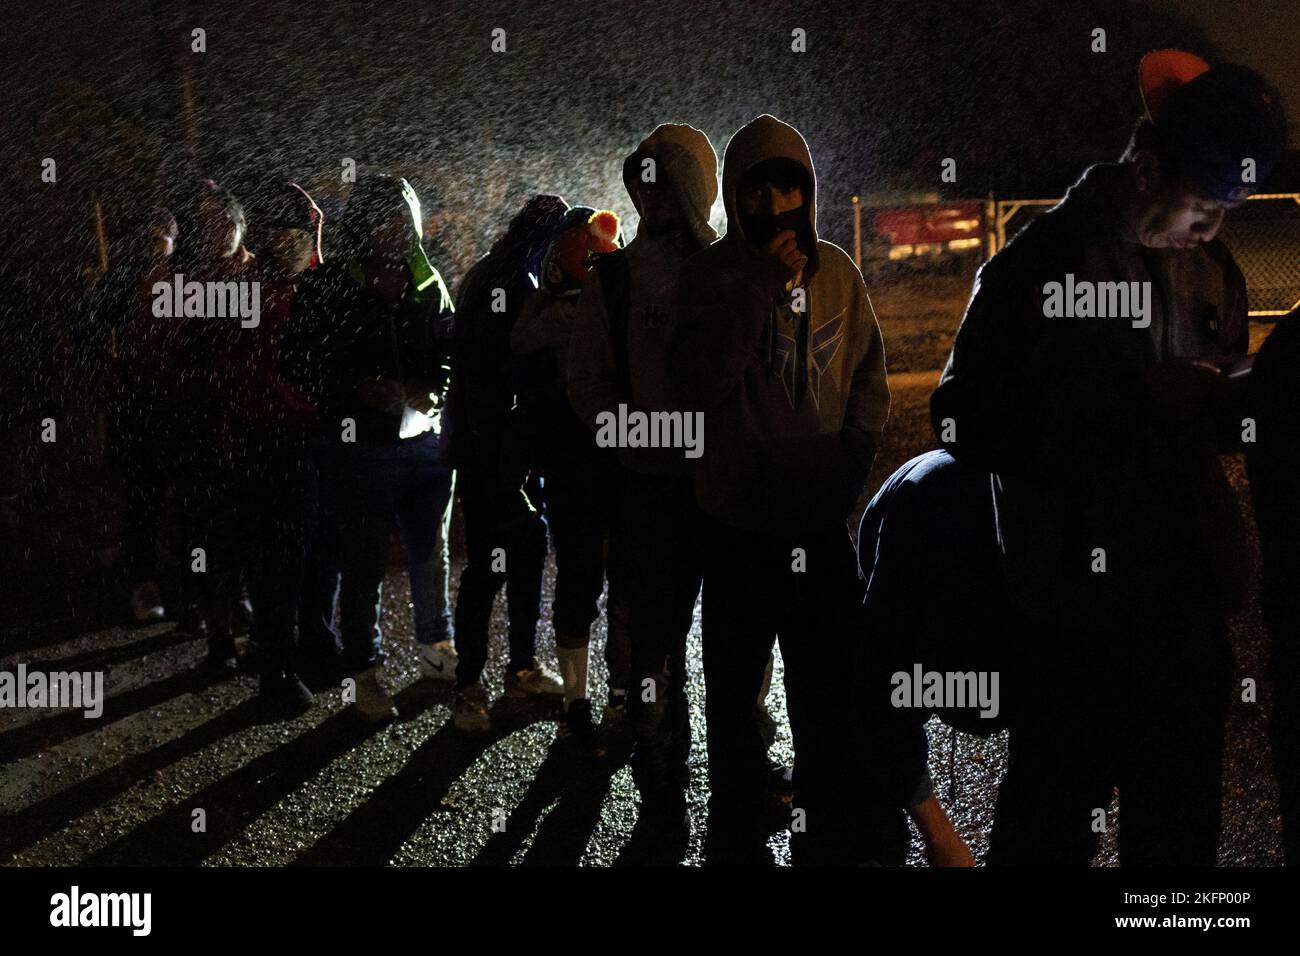 Youth migrants from Central and South America, traveling without adults, endure cold wet weather as they await to be registered by border patrol agents after being smuggled across the Rio Grande river from Mexico into Roma, Texas, U.S., November 18, 2022.  REUTERS/Adrees Latif Stock Photo